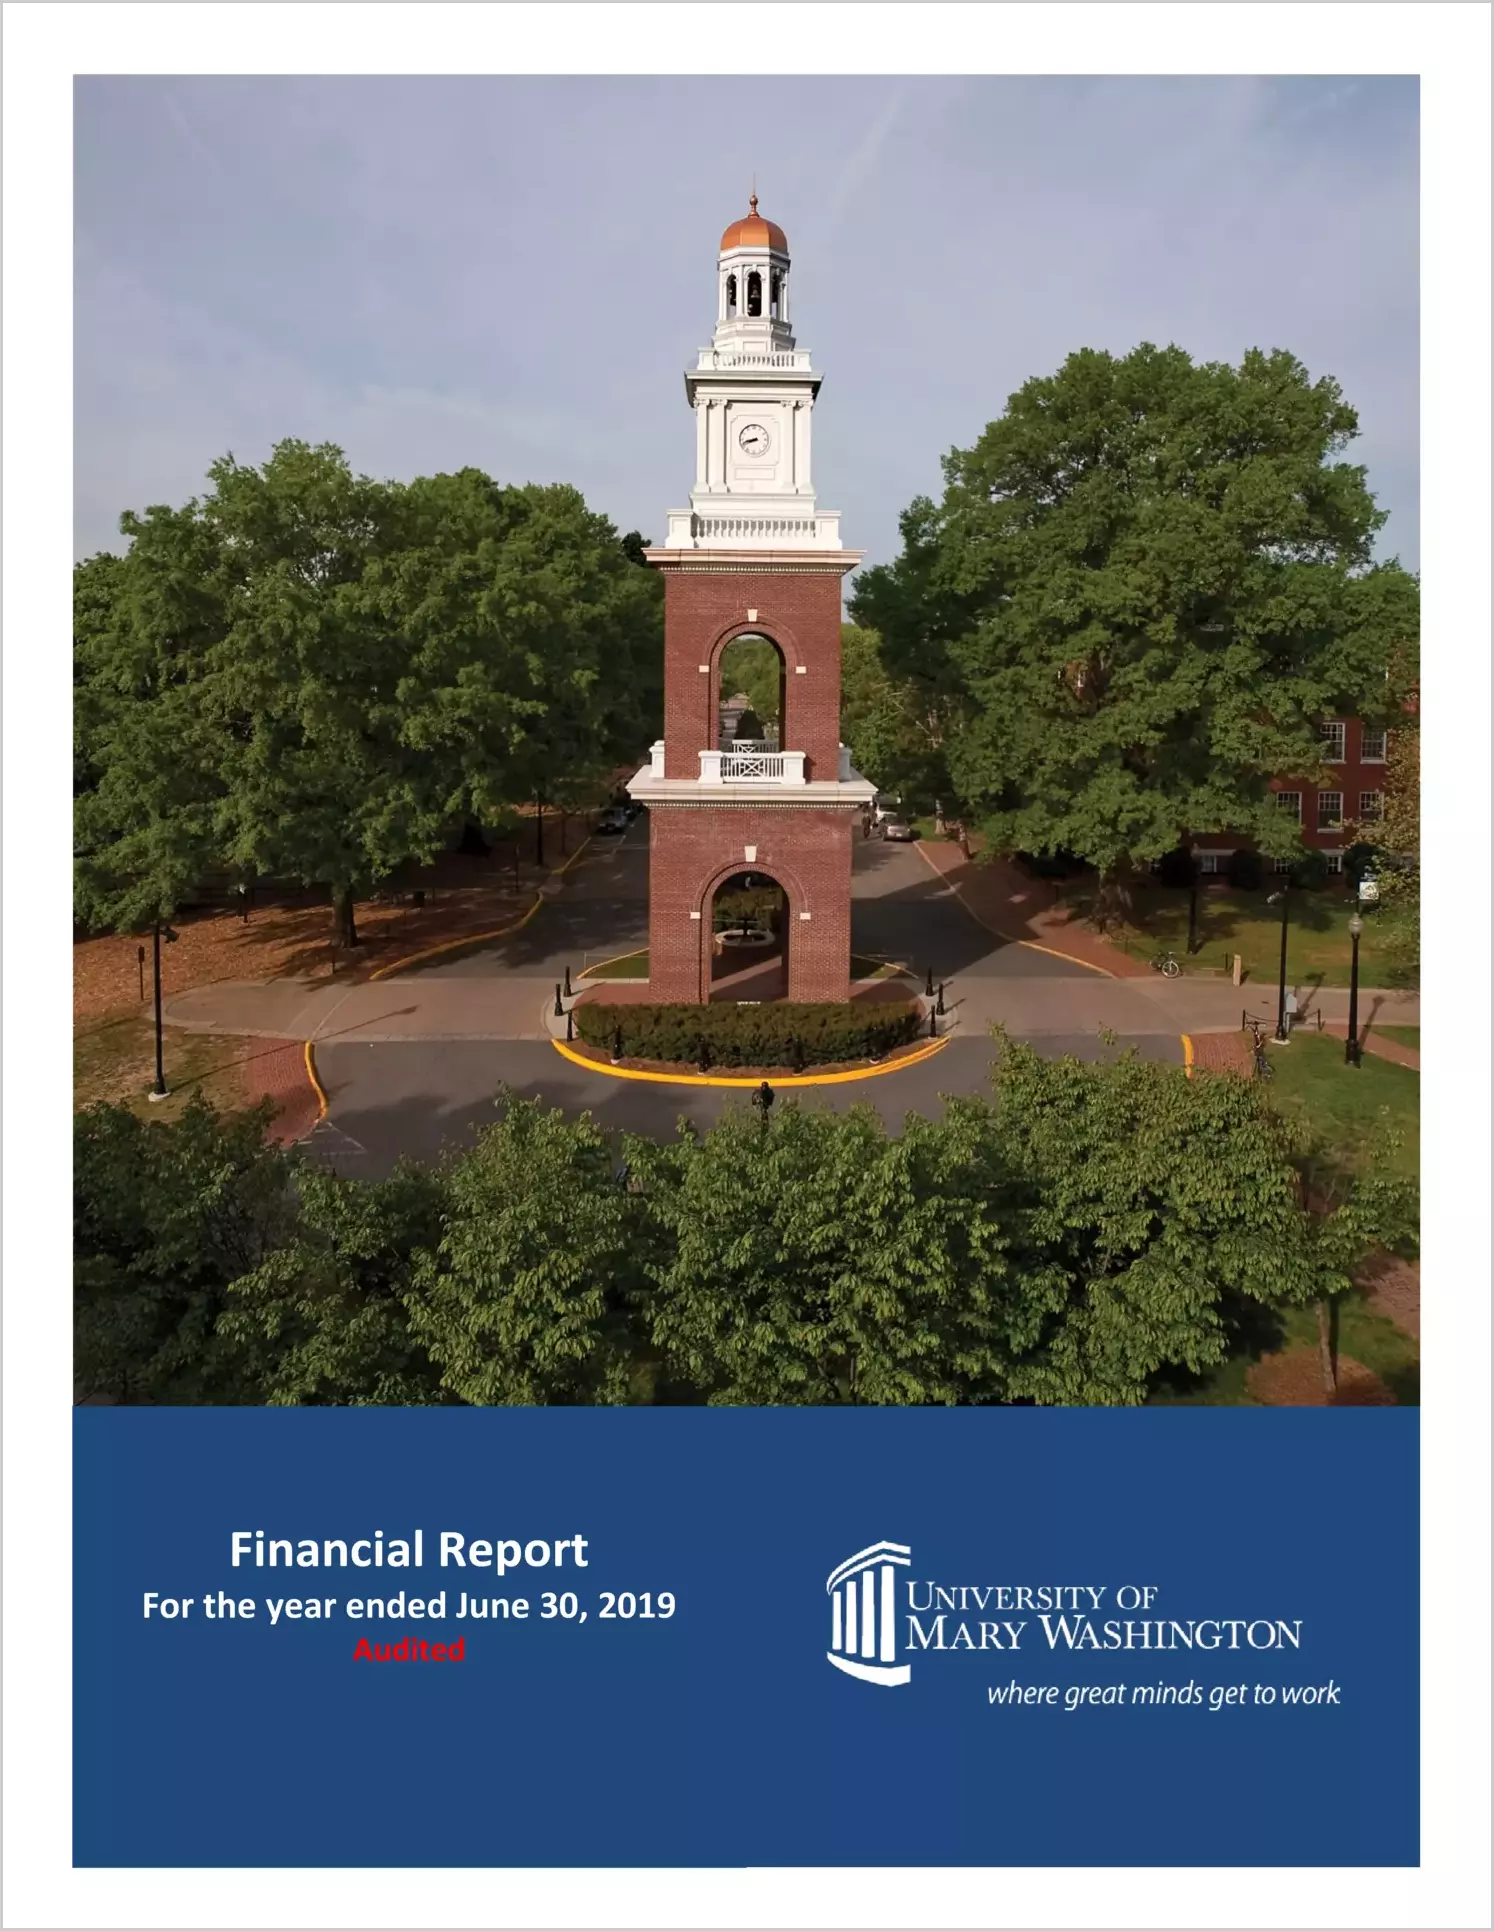 University of Mary Washington Financial Statements for the year ended June 30, 2019